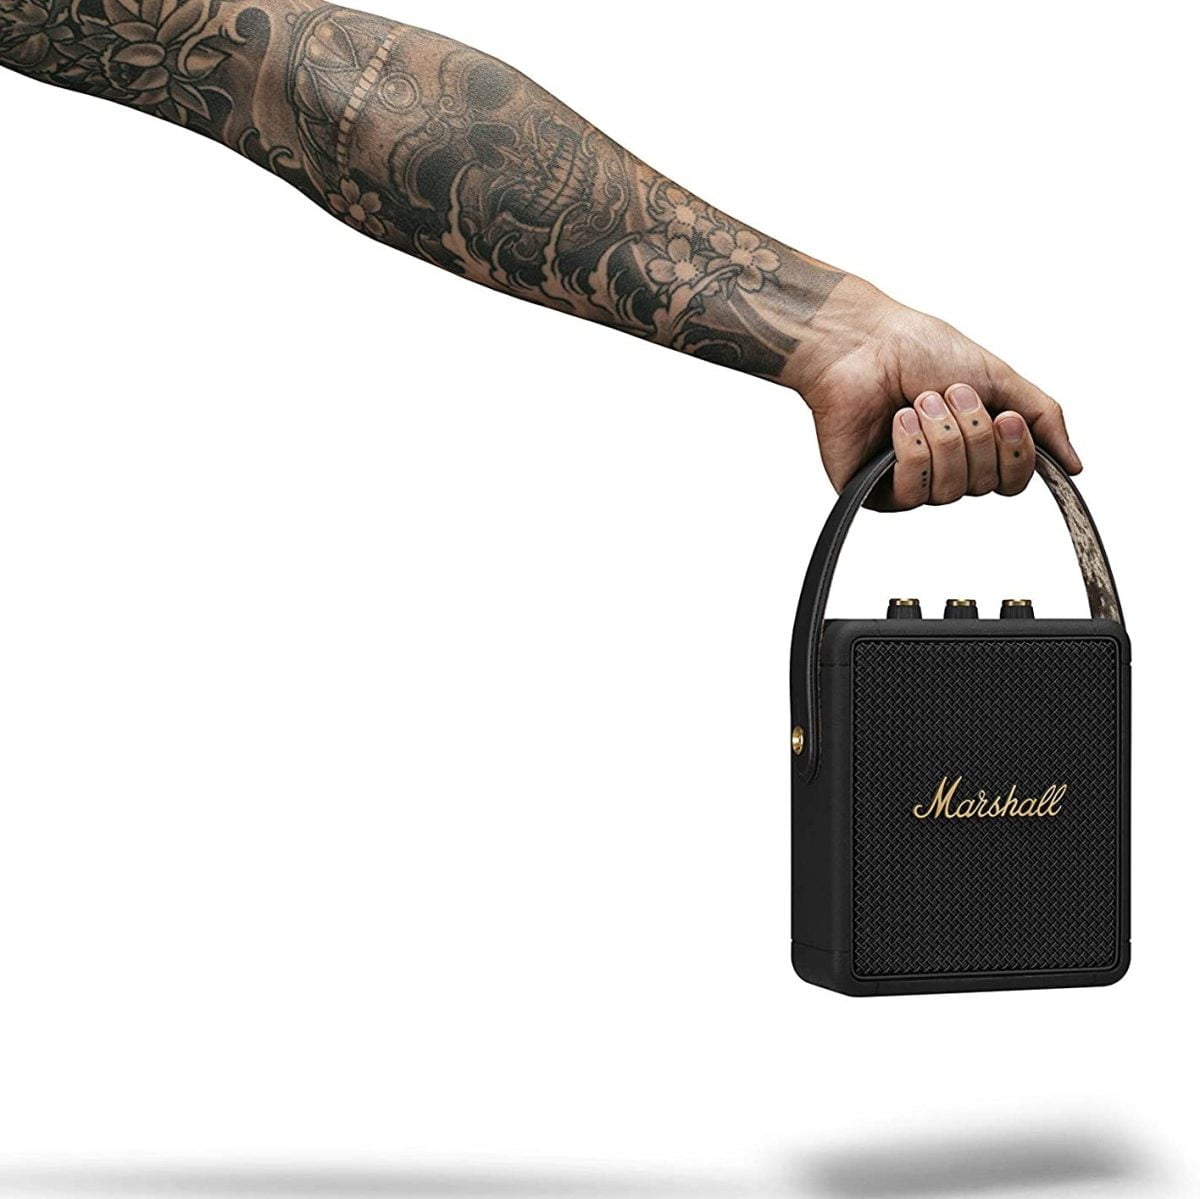 71Jwzfeyrl. Ac Sl1500 Marshall &Lt;H1 Id=&Quot;Title&Quot; Class=&Quot;A-Size-Large A-Spacing-None&Quot;&Gt;Marshall Stockwell 2 Wireless Portable Bluetooth Speaker - Black &Amp; Brass&Lt;/H1&Gt; Https://Www.youtube.com/Watch?V=N85Btppxjvu &Lt;Ul Class=&Quot;A-Unordered-List A-Vertical A-Spacing-Mini&Quot;&Gt; &Lt;Li&Gt;&Lt;Span Class=&Quot;A-List-Item&Quot;&Gt;20+ Hours: Experience 20+ Hours Of Portable Playtime On A Single Charge&Lt;/Span&Gt;&Lt;/Li&Gt; &Lt;Li&Gt;&Lt;Span Class=&Quot;A-List-Item&Quot;&Gt;Bluetooth: Stockwell Ii Comes Equipped With Bluetooth 5.0 Technology For Wireless Music Play&Lt;/Span&Gt;&Lt;/Li&Gt; &Lt;Li&Gt;&Lt;Span Class=&Quot;A-List-Item&Quot;&Gt;Ipx4 Water Resistant: Stockwell Ii Has An Ipx4 Water-Resistant Rating, So It’s Able To Withstand Splashes Of Water When Accidents Happen&Lt;/Span&Gt;&Lt;/Li&Gt; &Lt;Li&Gt;&Lt;Span Class=&Quot;A-List-Item&Quot;&Gt;Fast Charging: 20 Minutes Of Charging Gets You Six Hours Of Portable Playtime&Lt;/Span&Gt;&Lt;/Li&Gt; &Lt;Li&Gt;&Lt;Span Class=&Quot;A-List-Item&Quot;&Gt;Multi Directional Sound: Blumlein Stereo Sound Construction Creates A Multi-Directional Experience That Will Immerse You In Your Music&Lt;/Span&Gt;&Lt;/Li&Gt; &Lt;/Ul&Gt; Marshall Stockwell 2 Marshall Stockwell 2 Speaker - Black &Amp; Brass